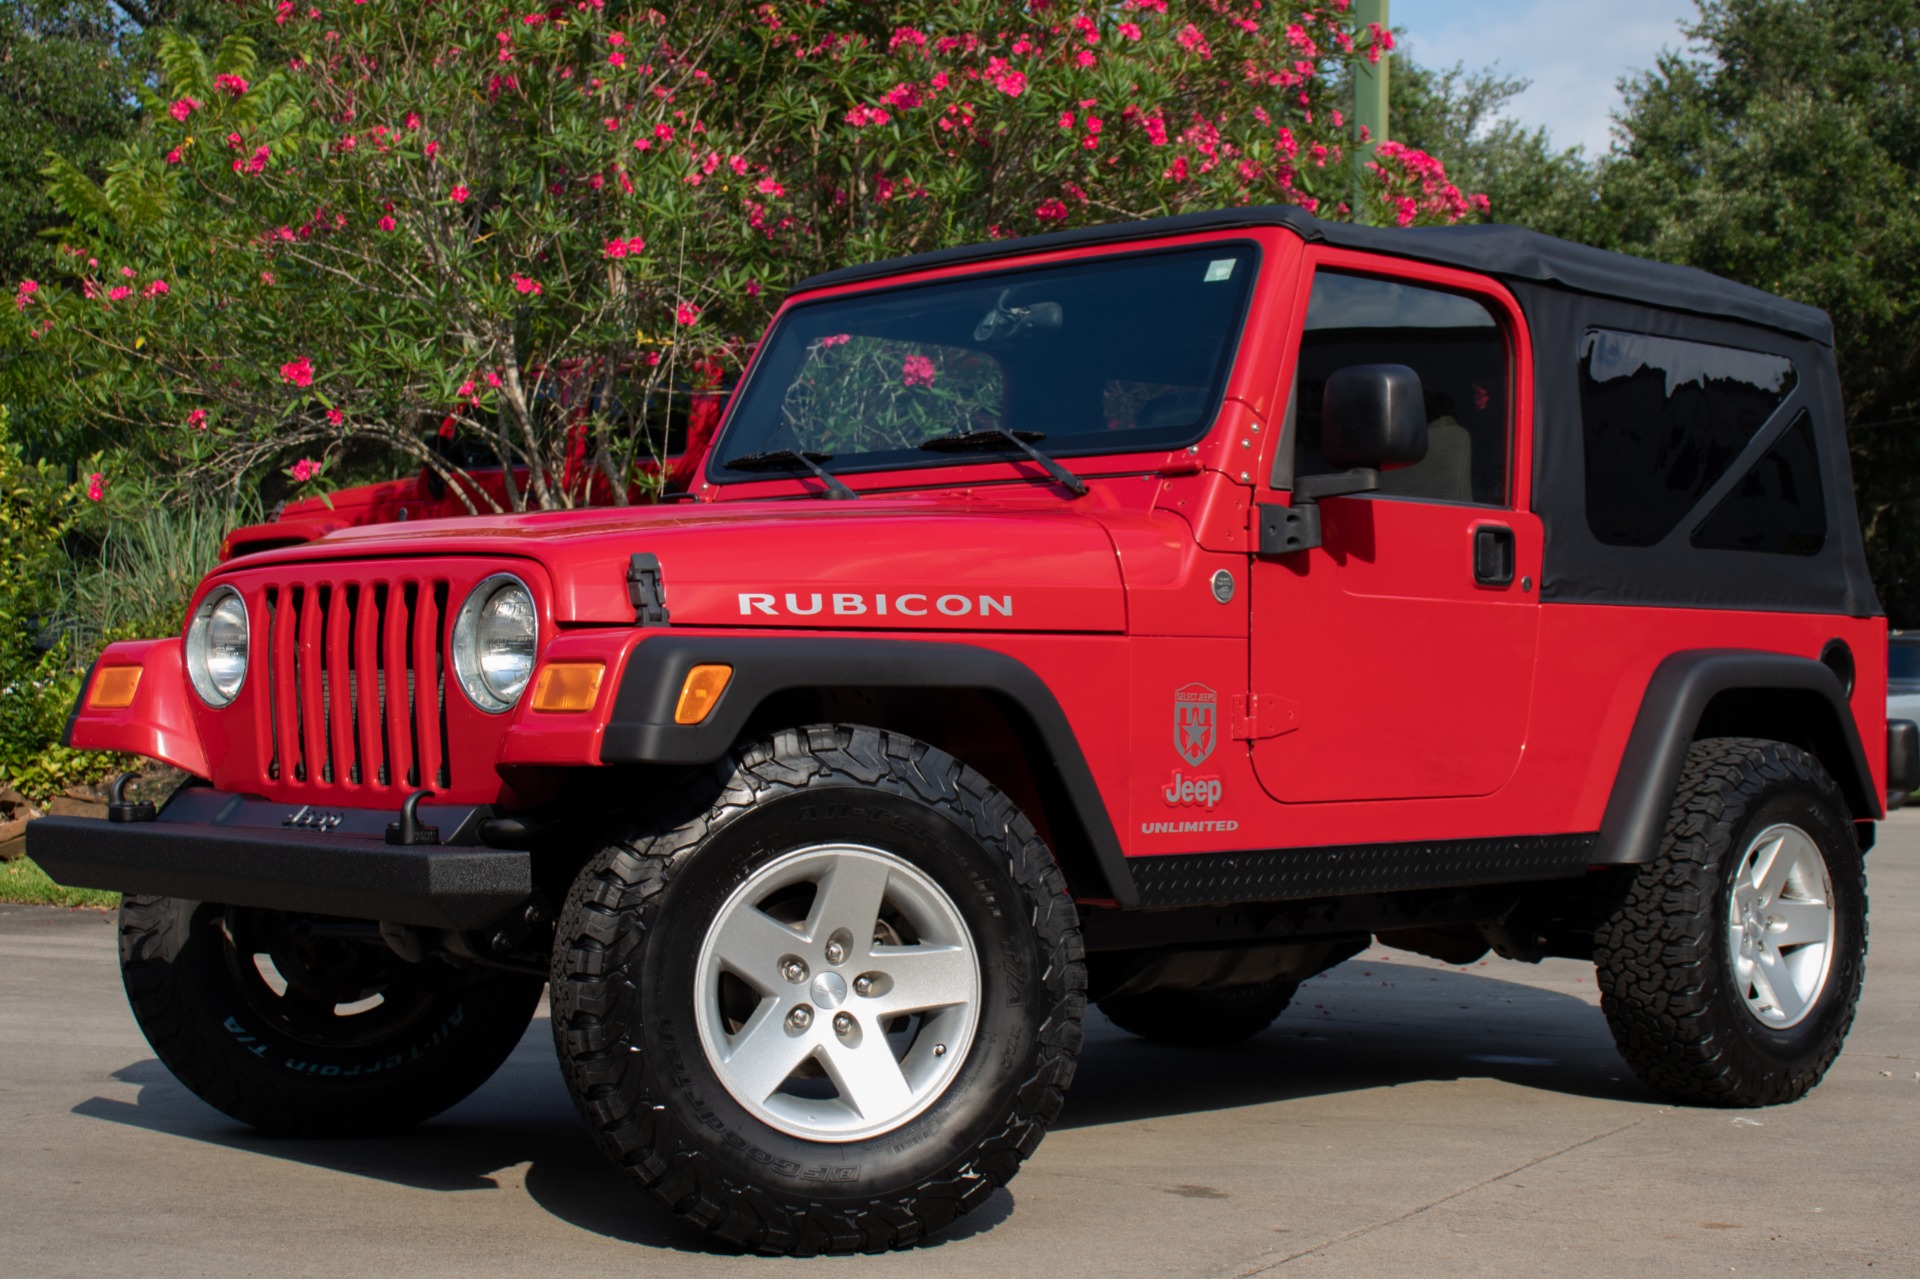 Used 2005 Jeep Wrangler Unlimited Rubicon For Sale ($25,995) | Select Jeeps  Inc. Stock #327951